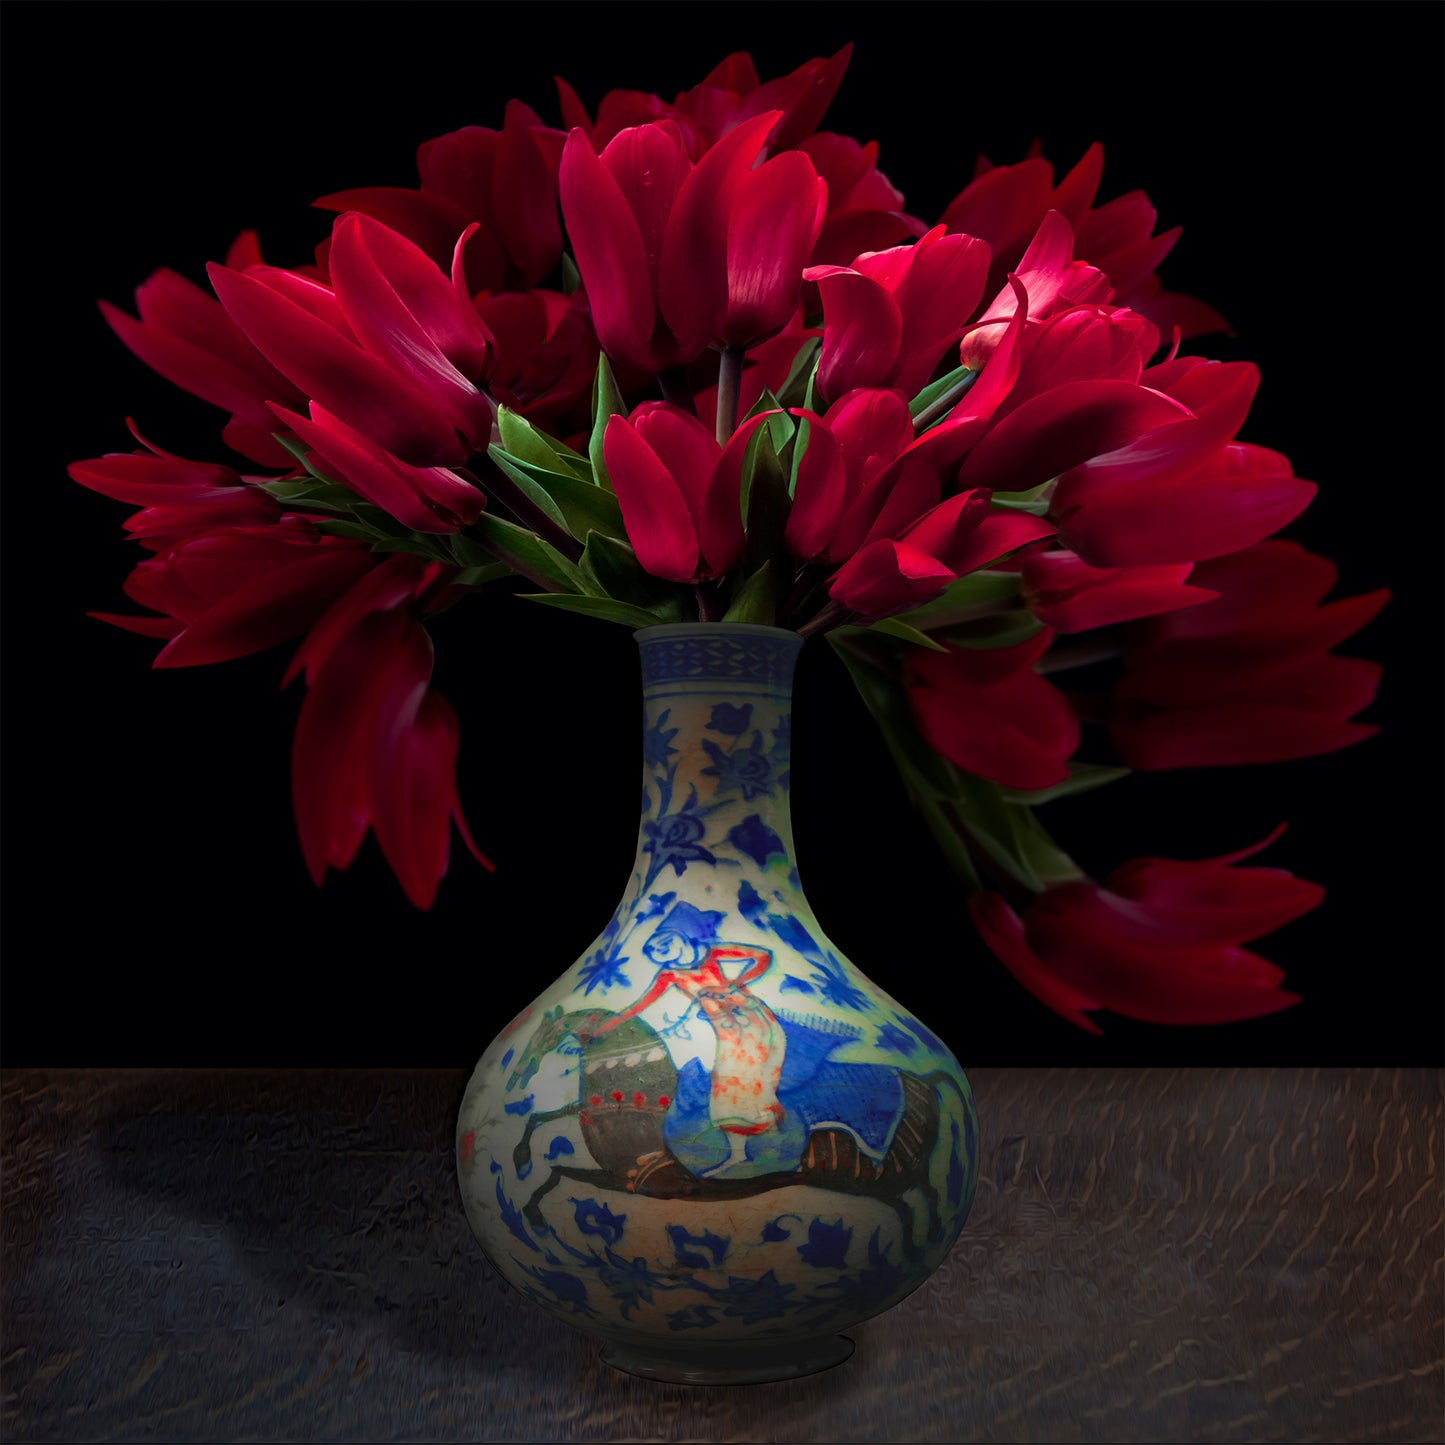 Tulips in a Persian Vessel (Vessel courtesy Royal Ontario Museum)